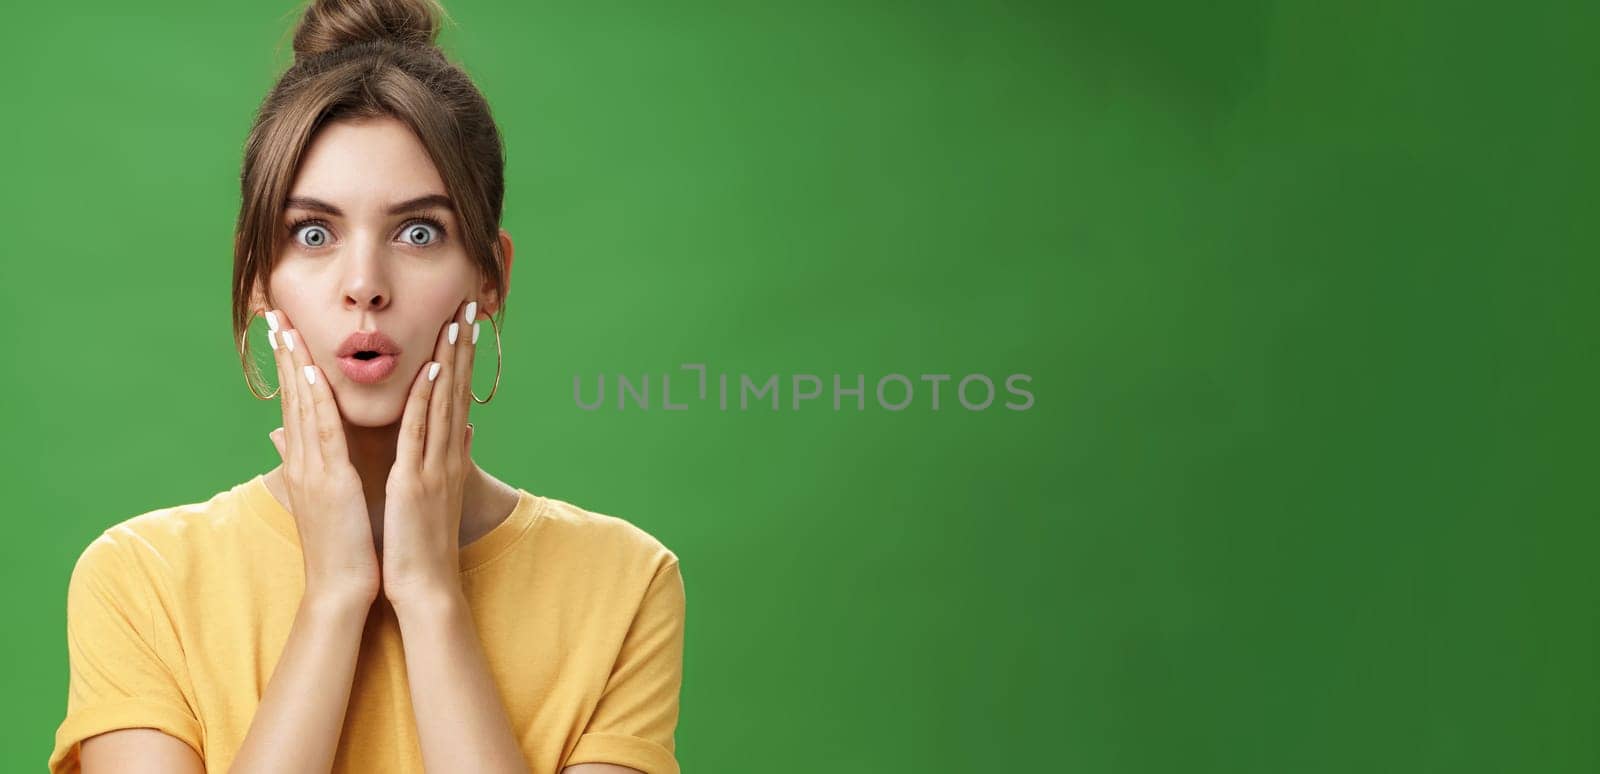 Portrait of impressed and shocked cute feminine woman in yellow t-shirt folding lips from excitement and interest touching cheeks surprised reacting to amazing rumor posing over green background. Body language concept